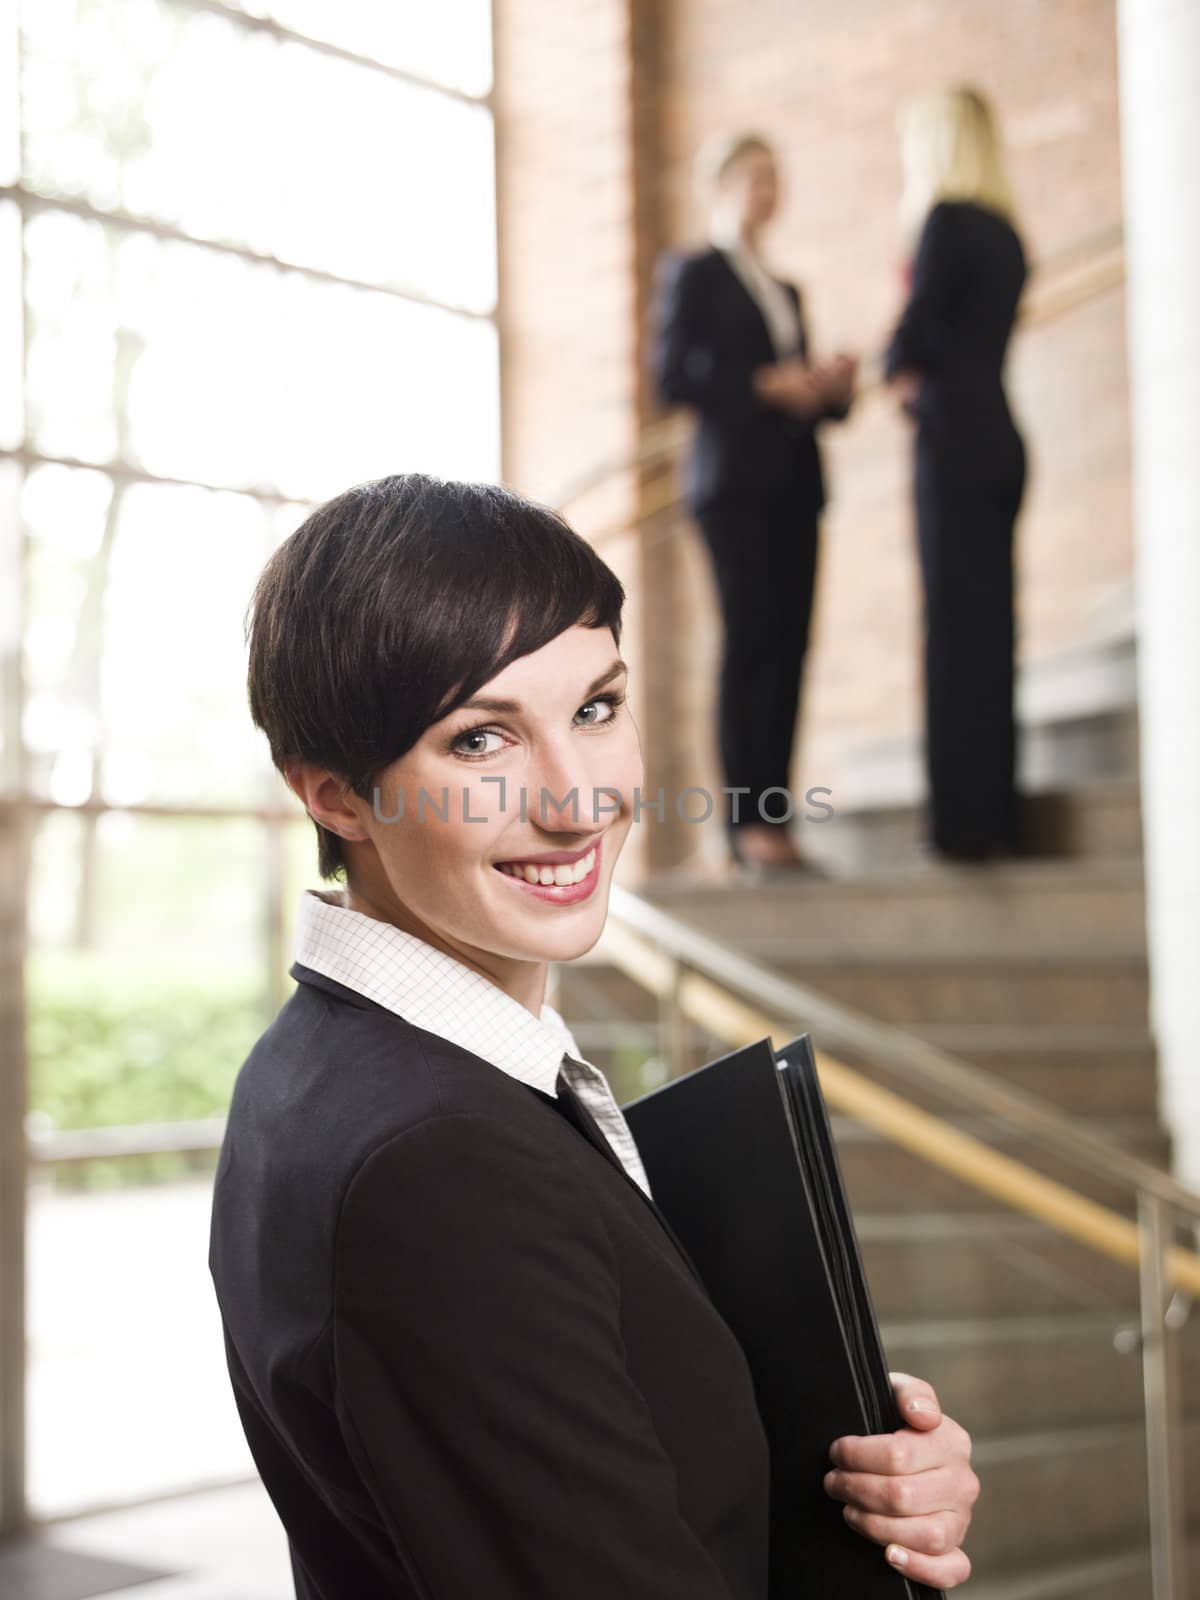 Smiling businesswoman with a folder